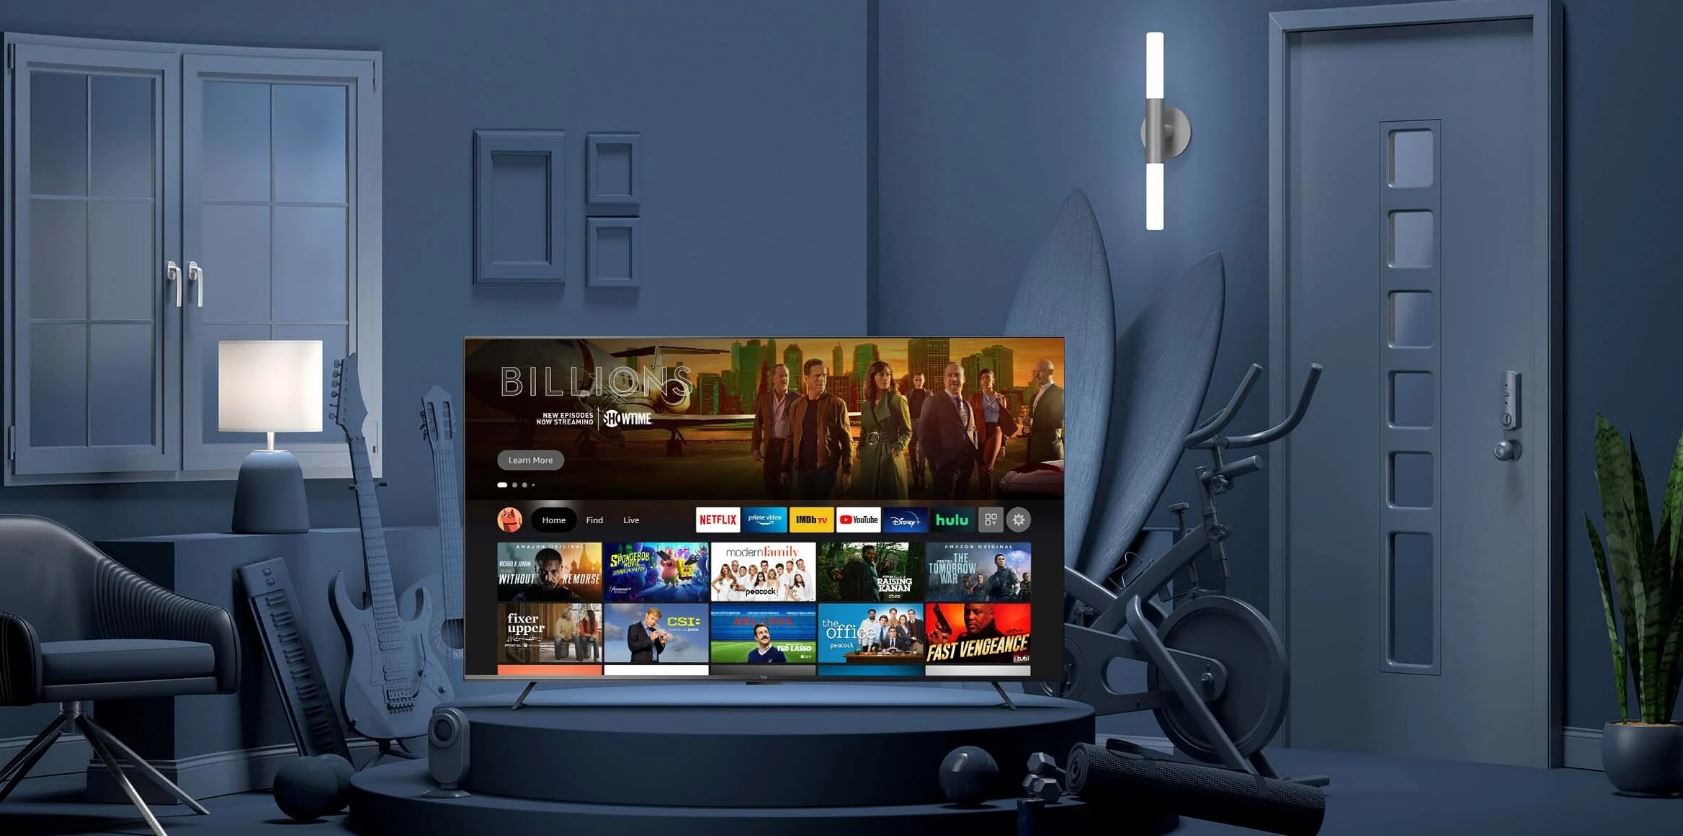 Showing how a Smart TV can be integrated into different smart devices by having them glow against a colorless background of a room